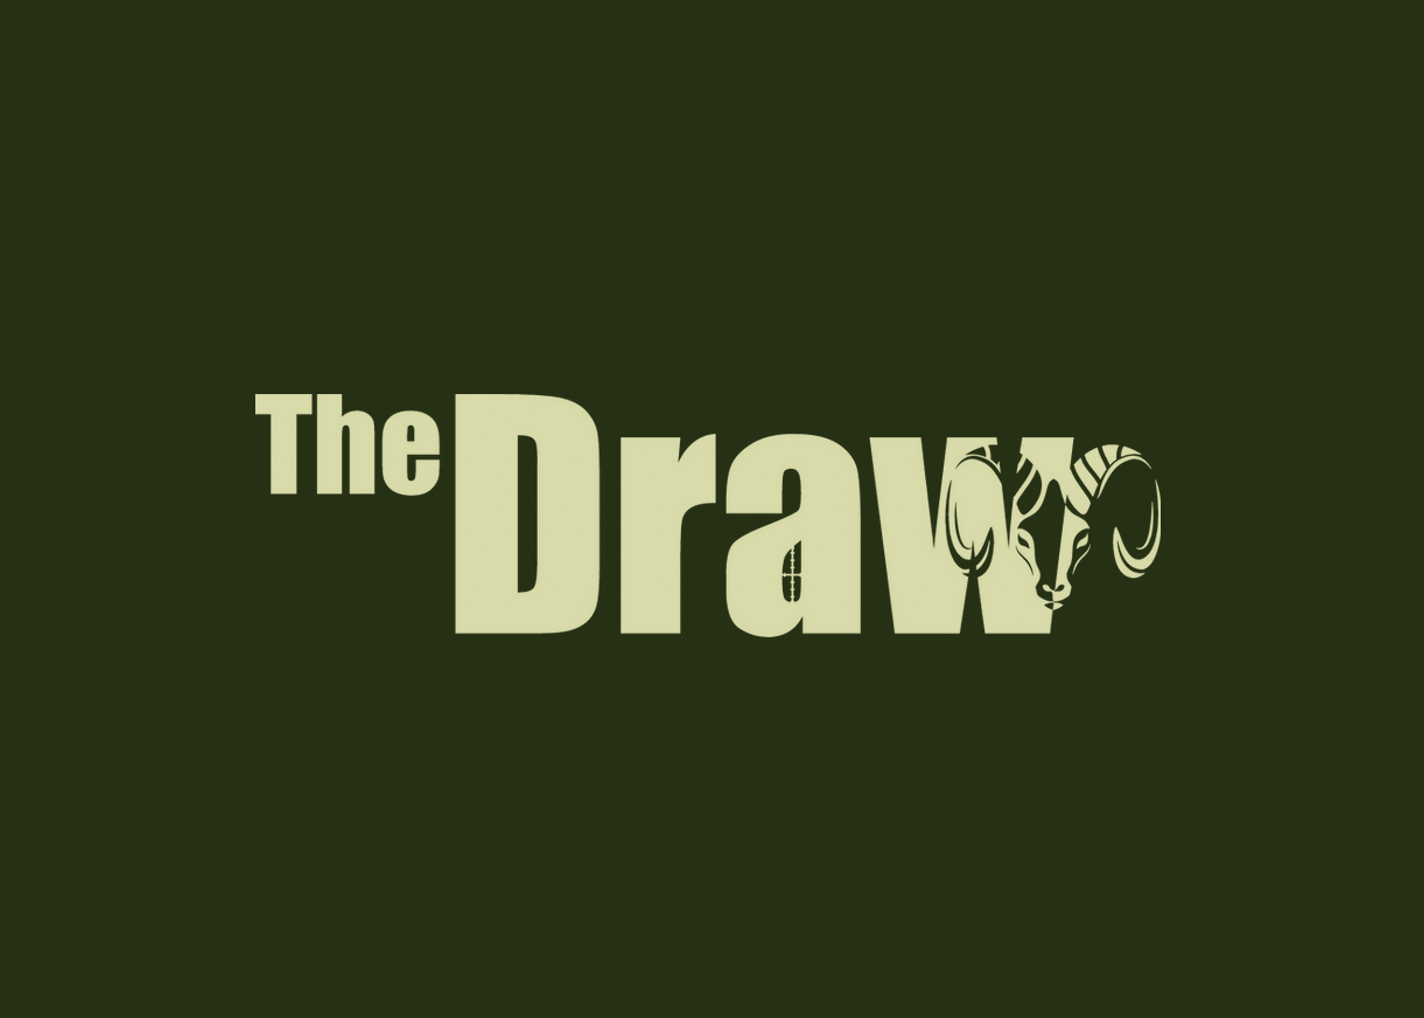 The Draw